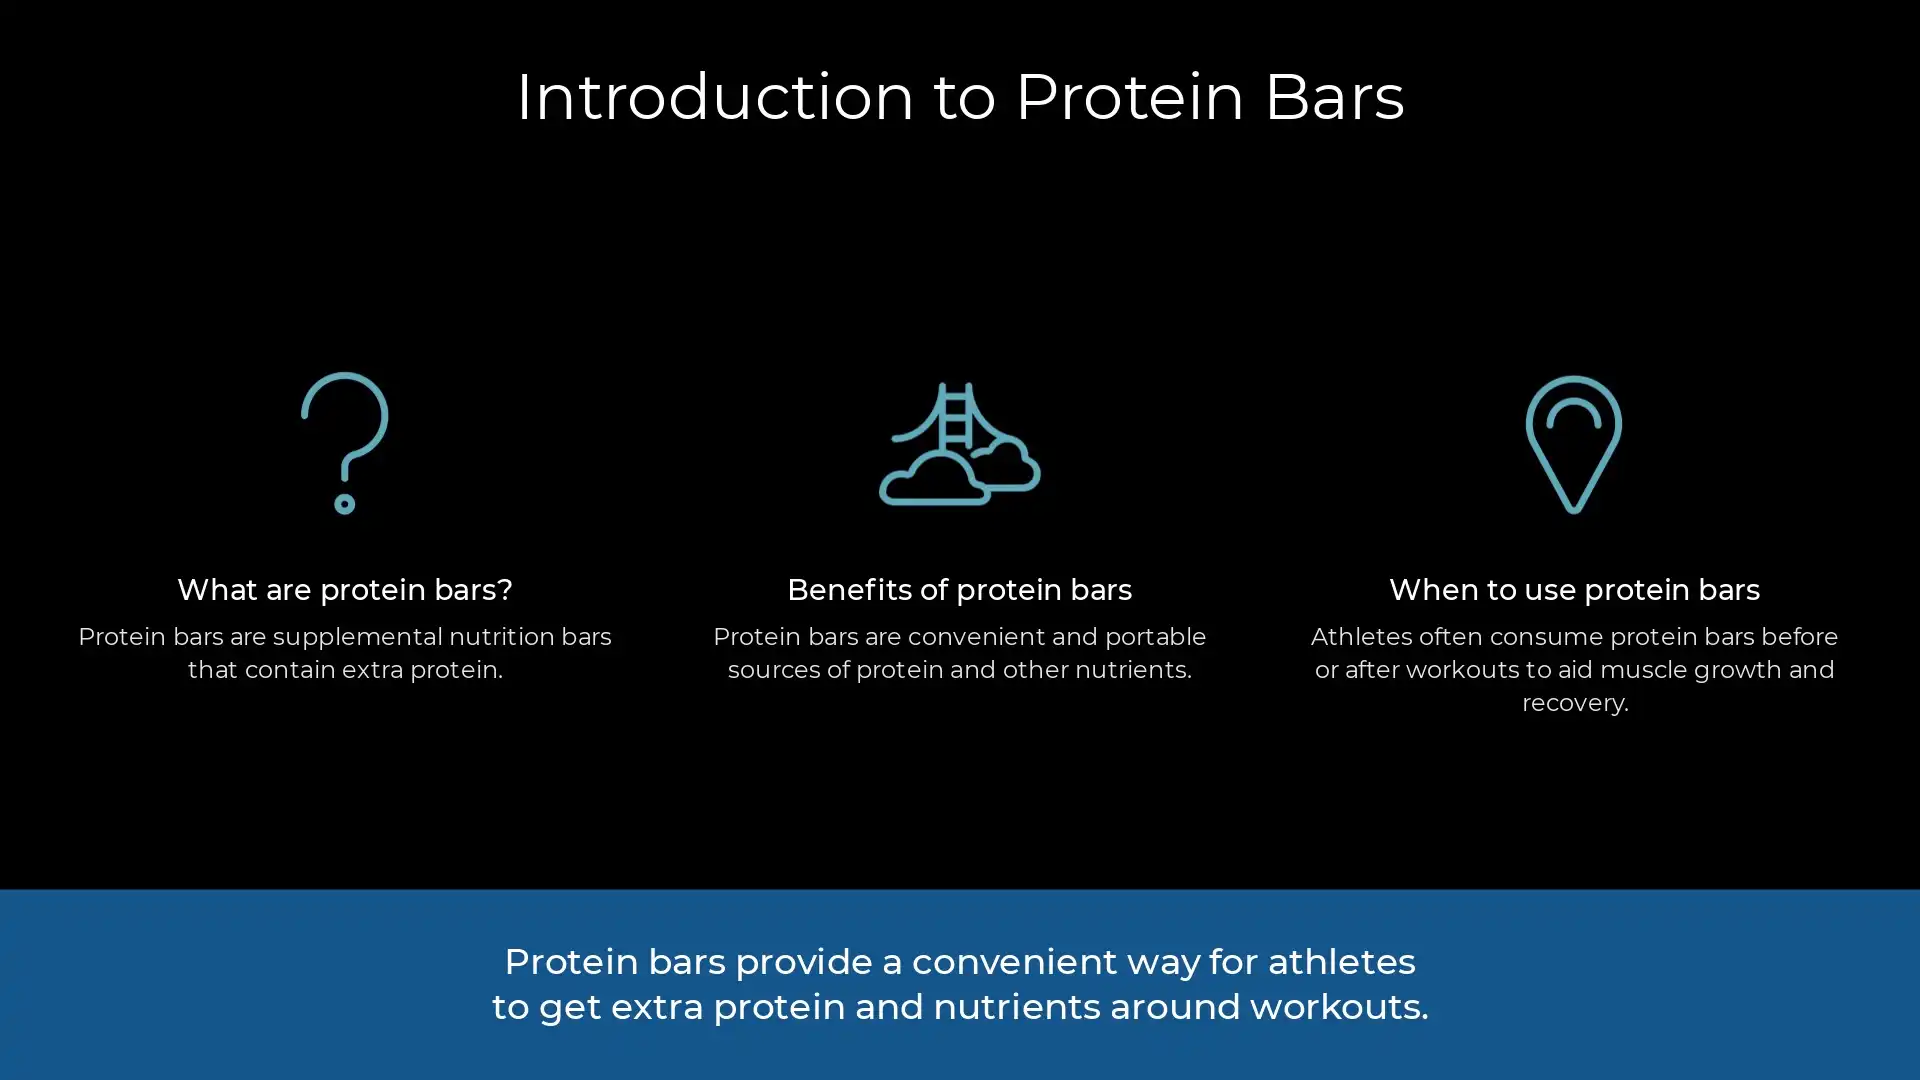 Protein Bars in Athletic Training Slide 2